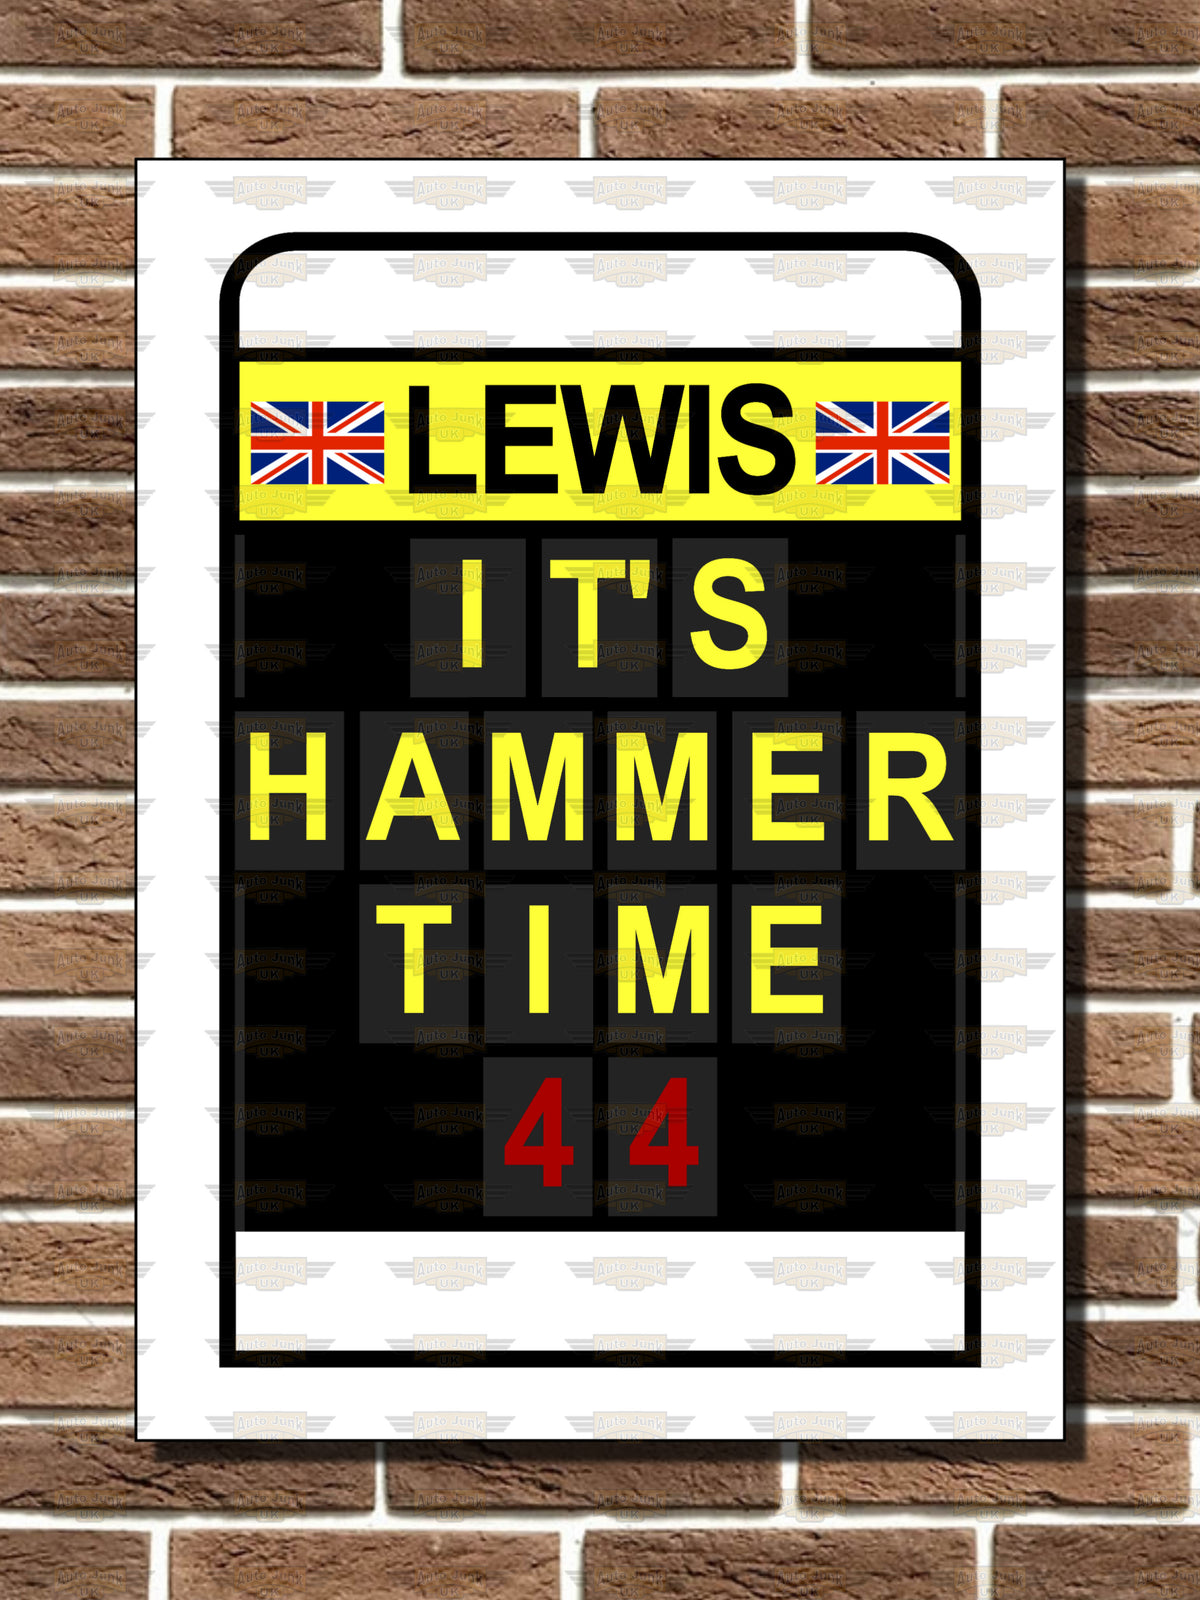 Lewis Hamilton "It's Hammer Time" Pit Board Metal Sign